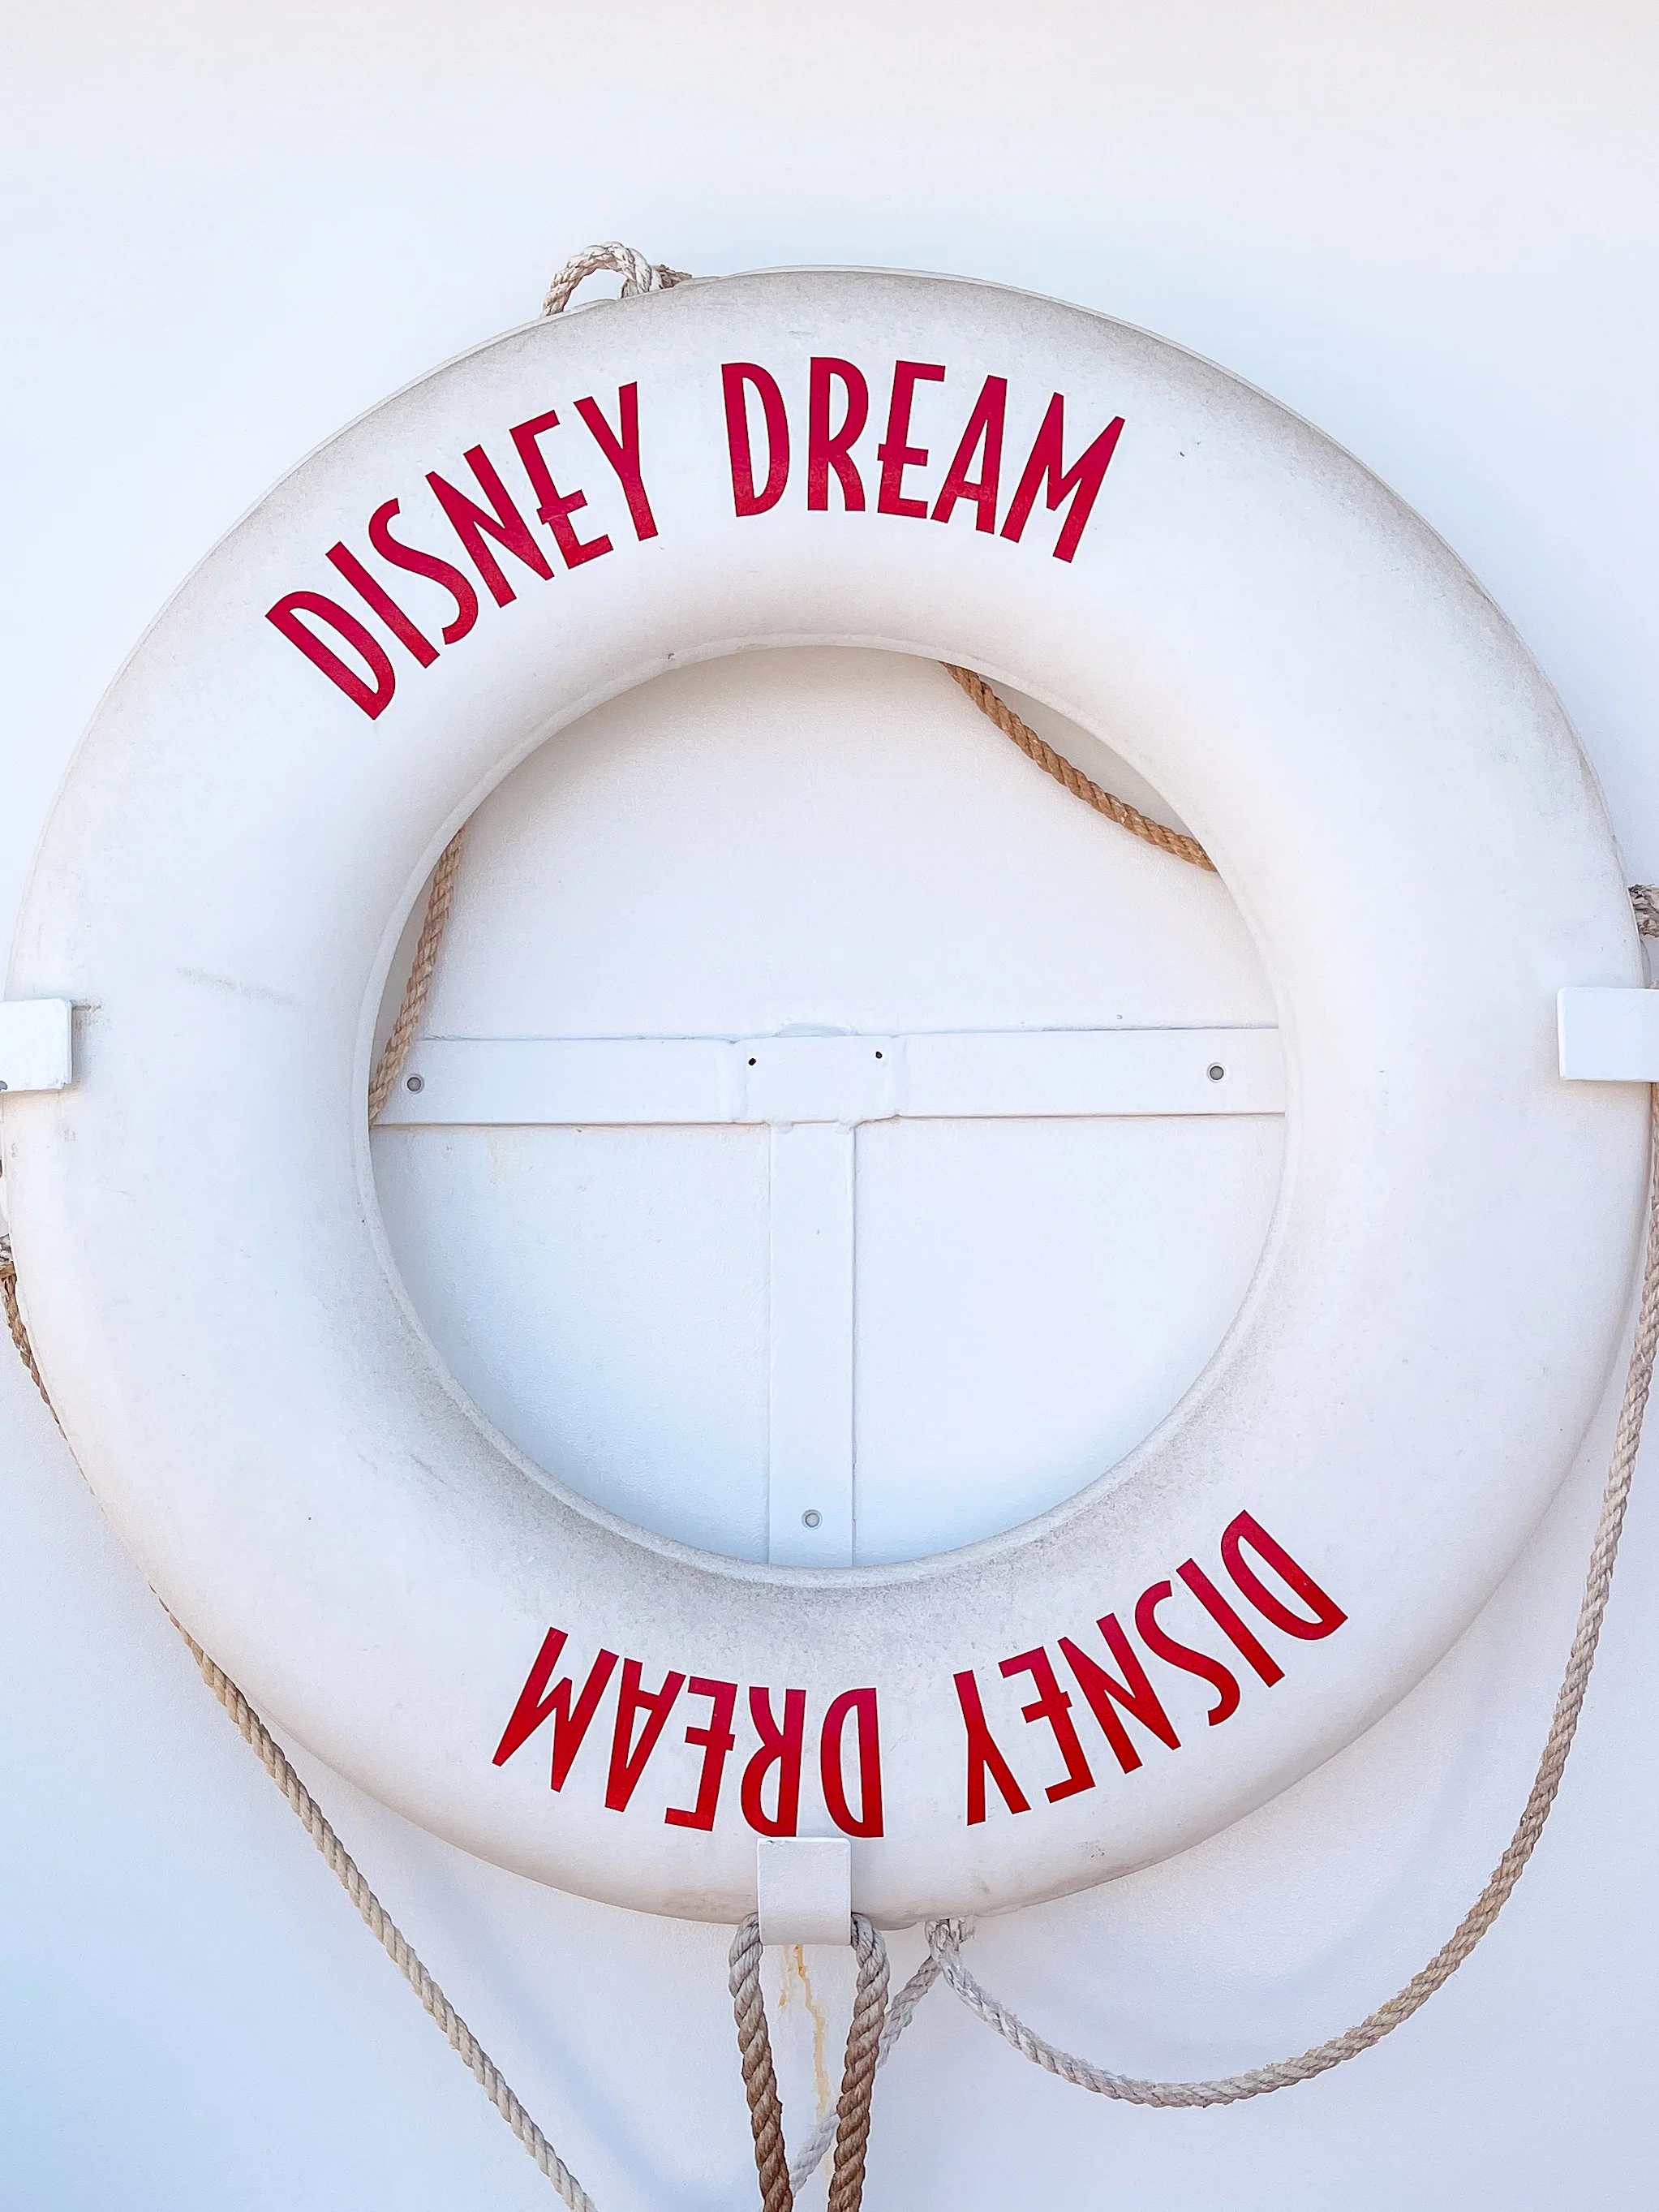 A life preserver from the Disney Dream cruise ship.